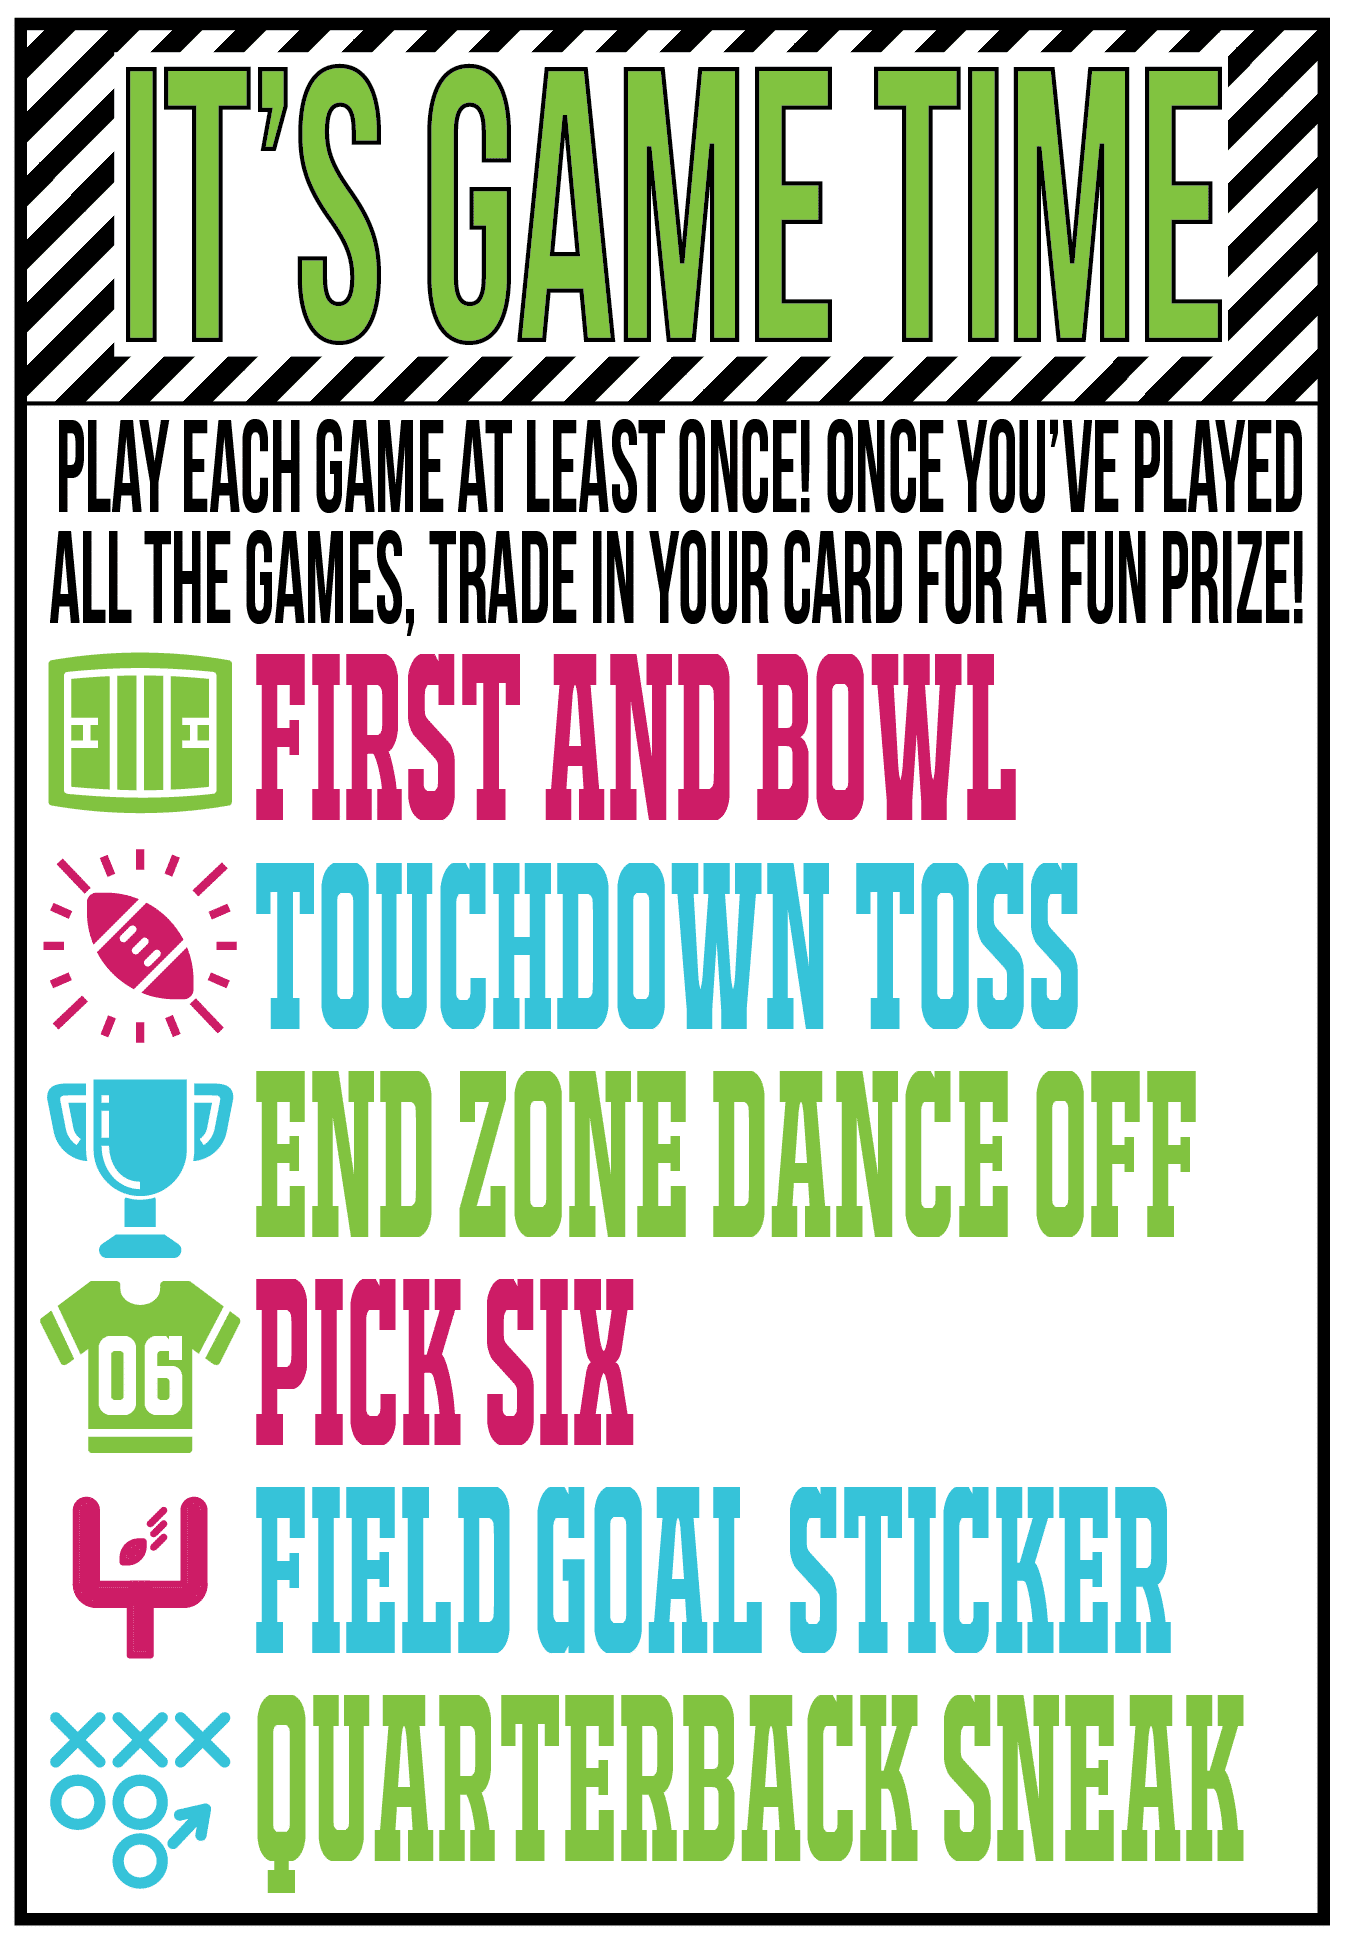 Football Party Games for Kids and Other Touchdown Worthy Party Ideas